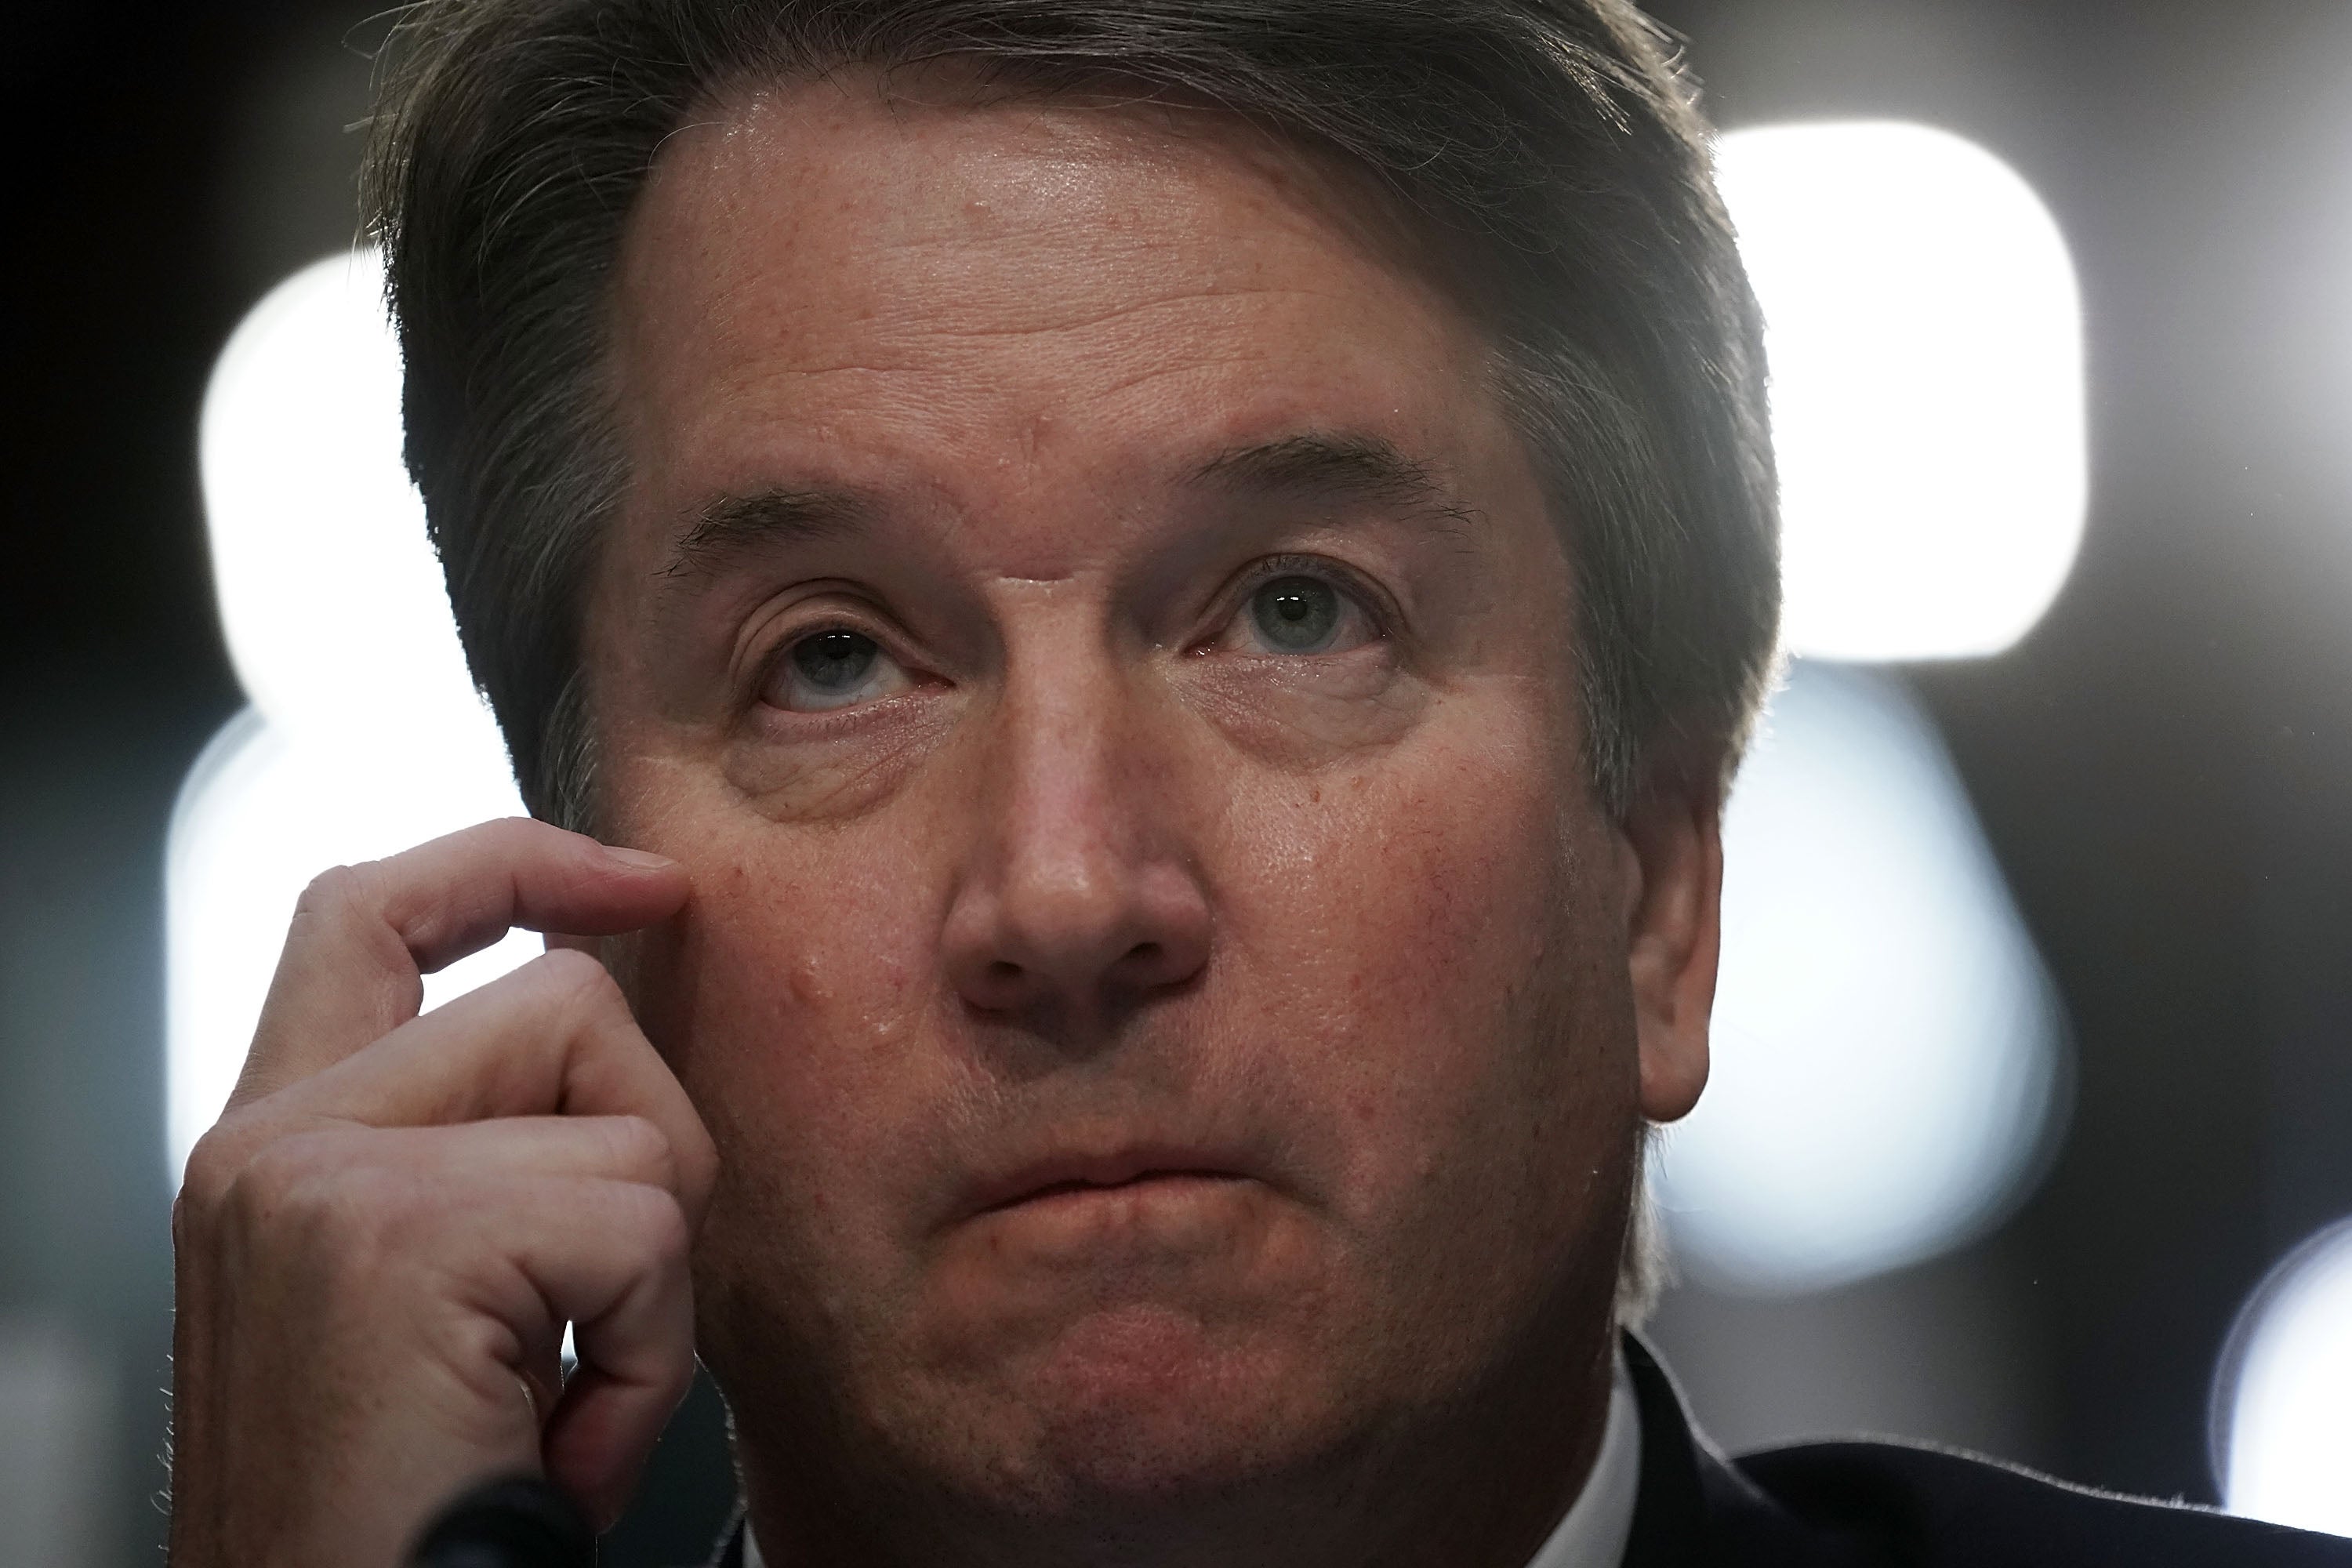 Supreme Court Nominee Brett Kavanaugh and His Accuser Christine Blasey Ford to Testify Before Senate Judiciary Committee on Monday